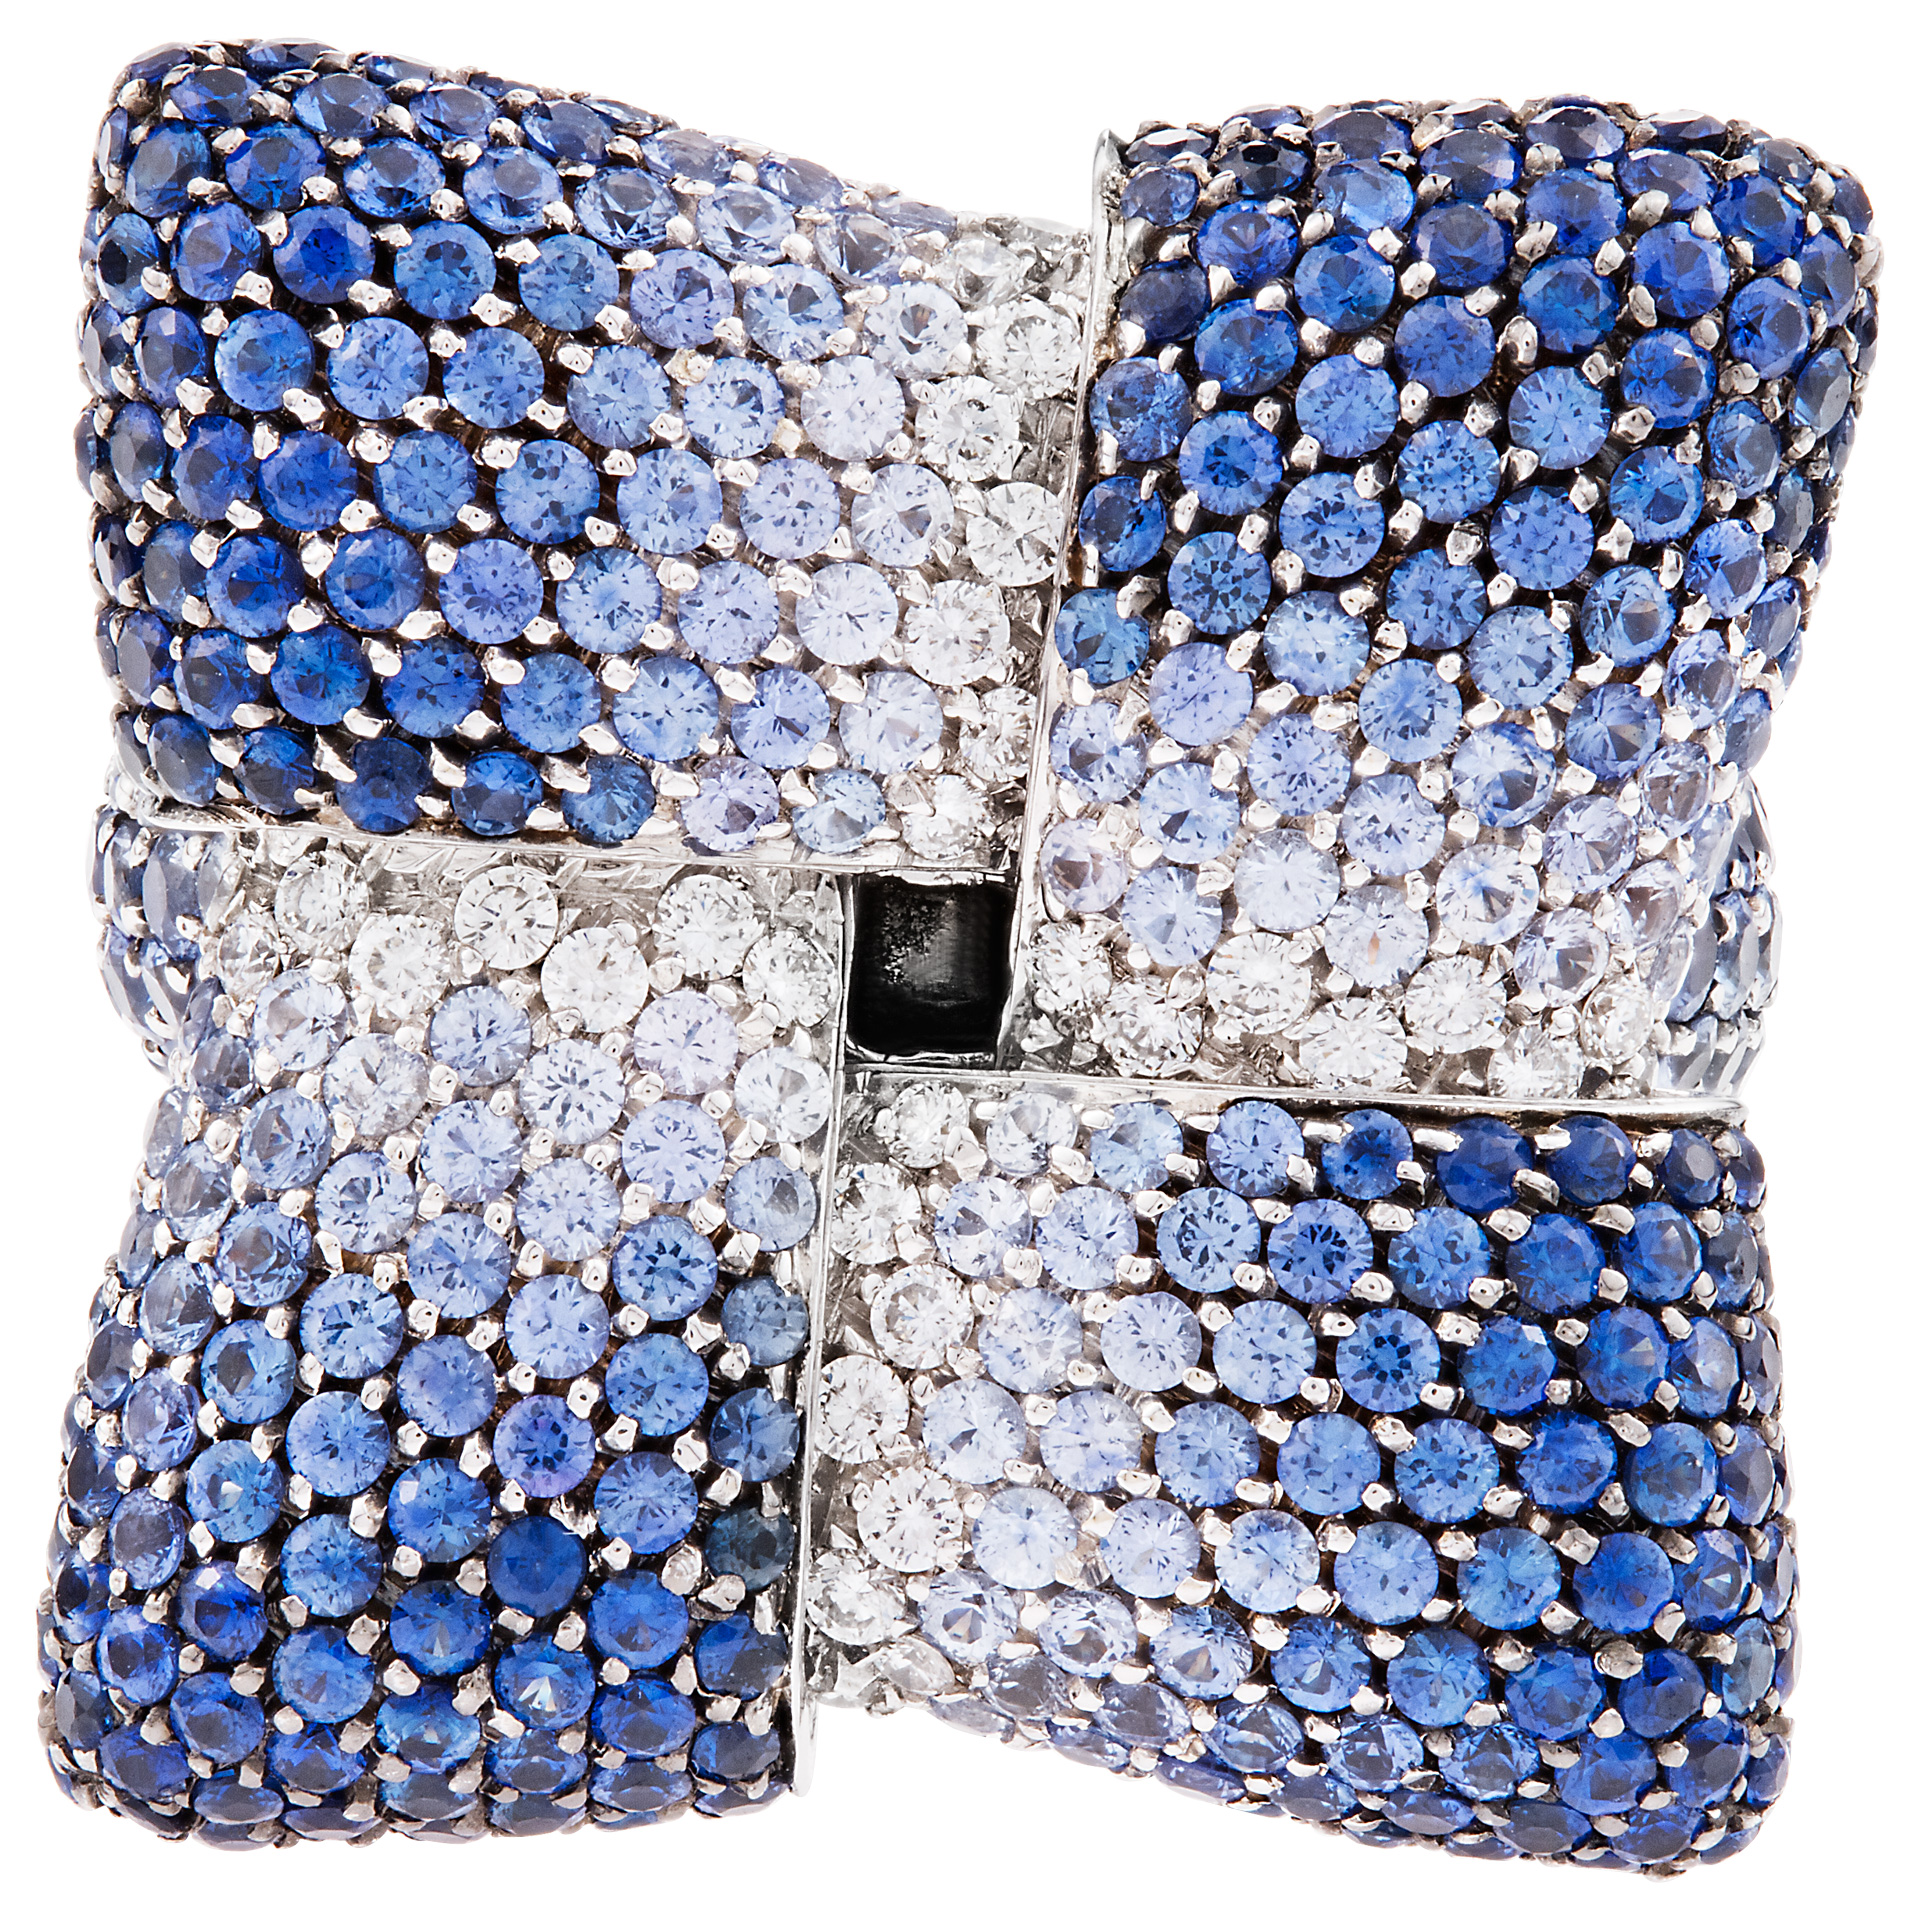 18k white gold pave diamond knot ring with sapphires running from deep blue to light blue. image 1